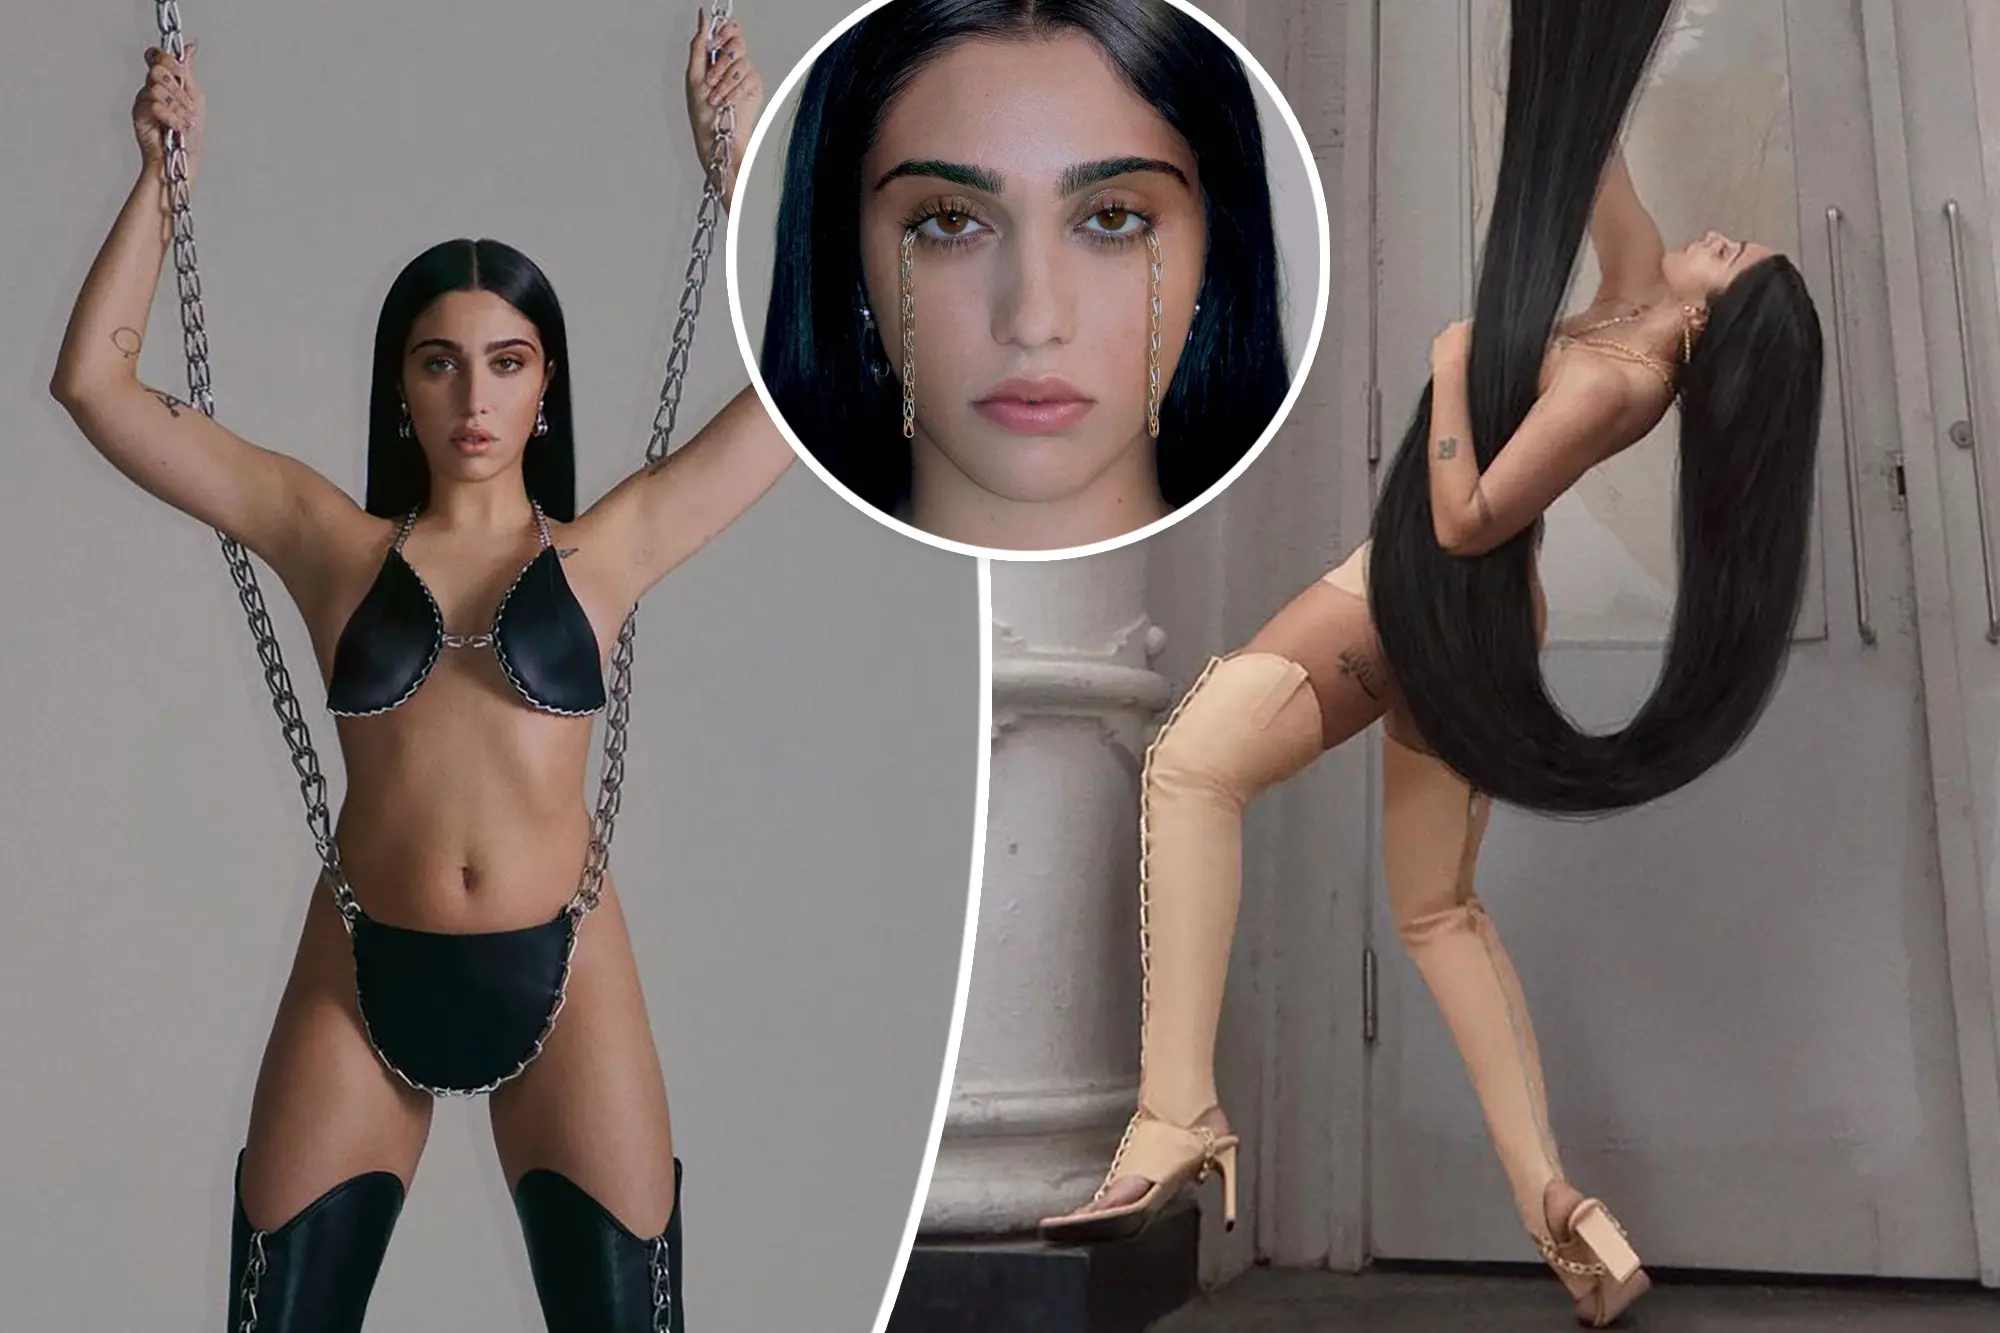 Lourdes Leon’s Steamy Photoshoot: Madonna’s Daughter in a Daring Fashion Campaign